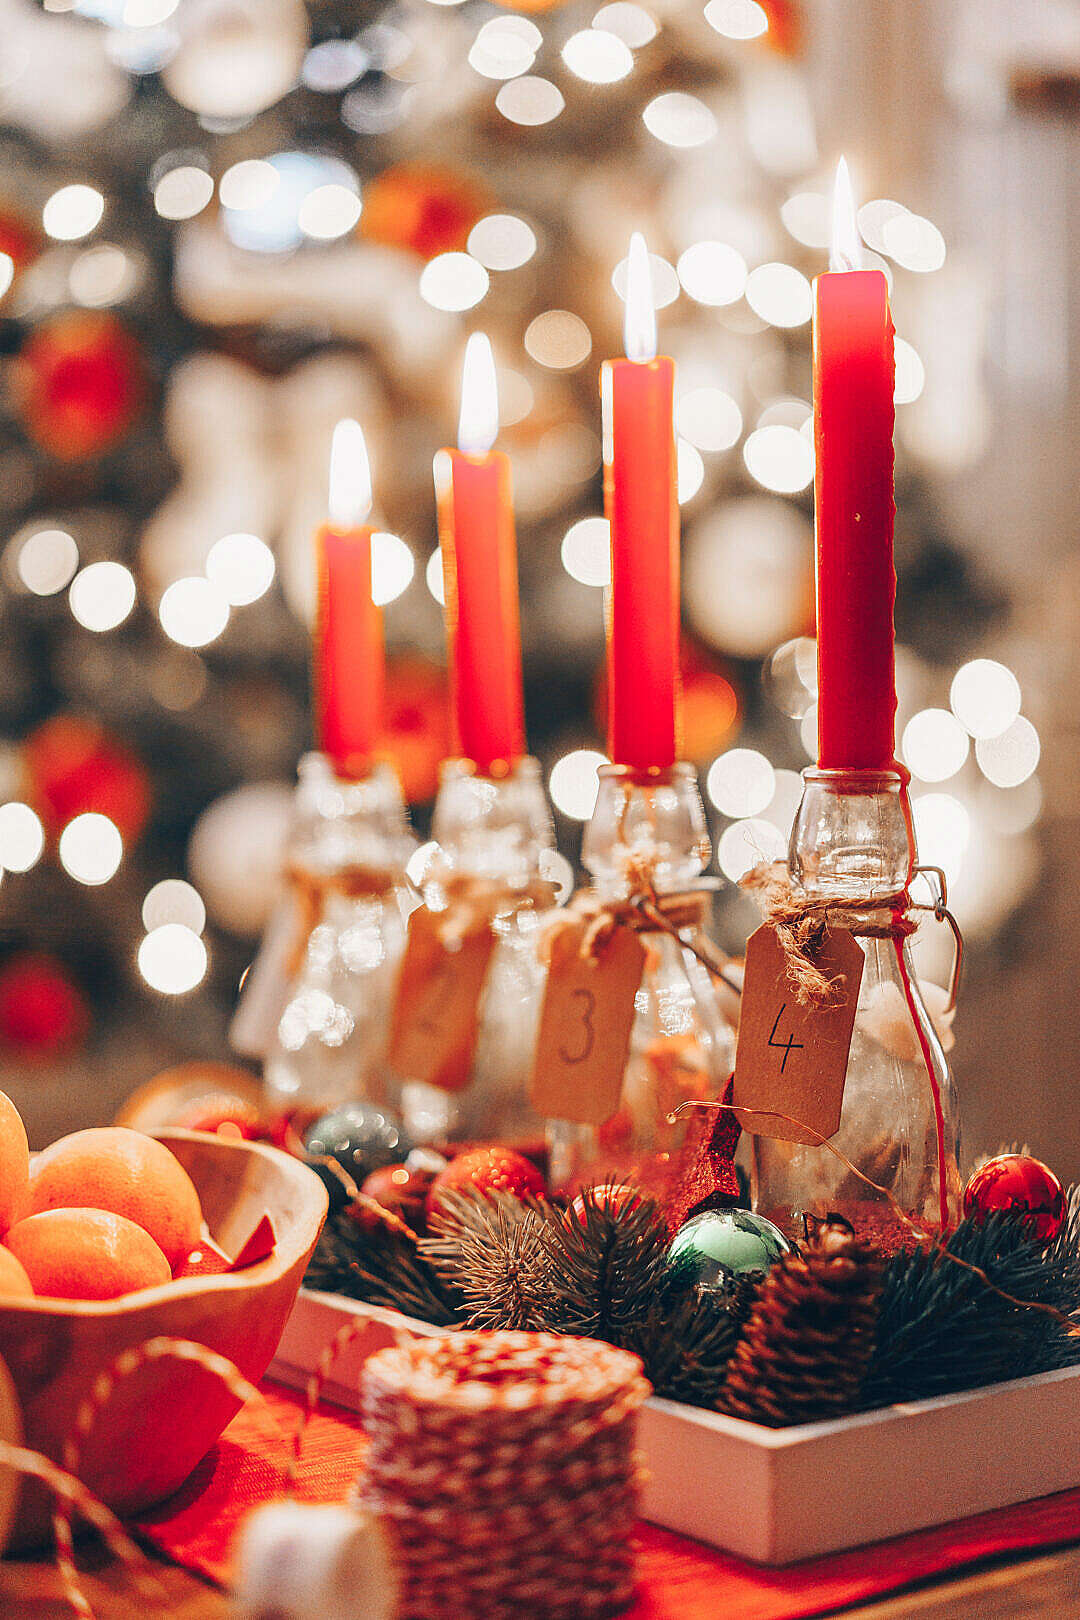 Download Christmas Advent Candlesticks FREE Stock Photo